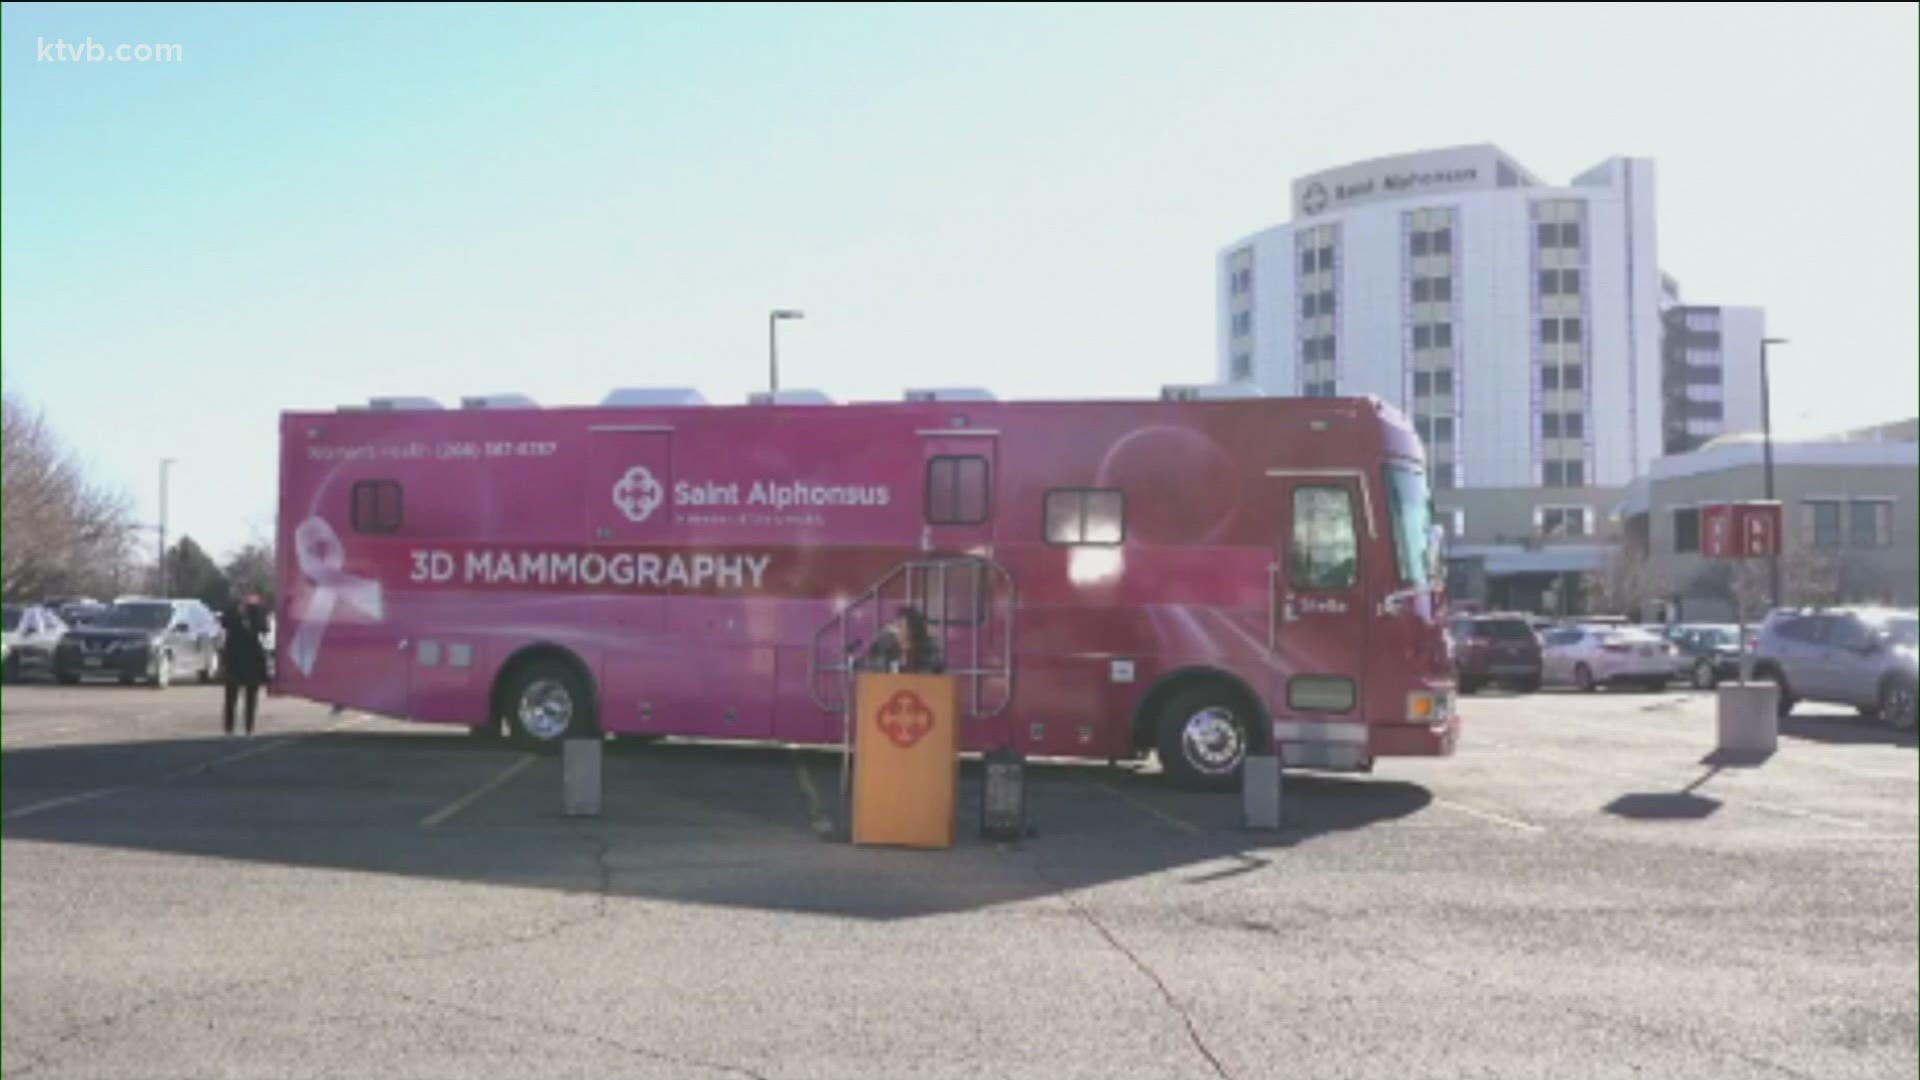 Saint Al's unveiled its new bright pink mobile mammogram bus at a ribbon-cutting ceremony on Monday.